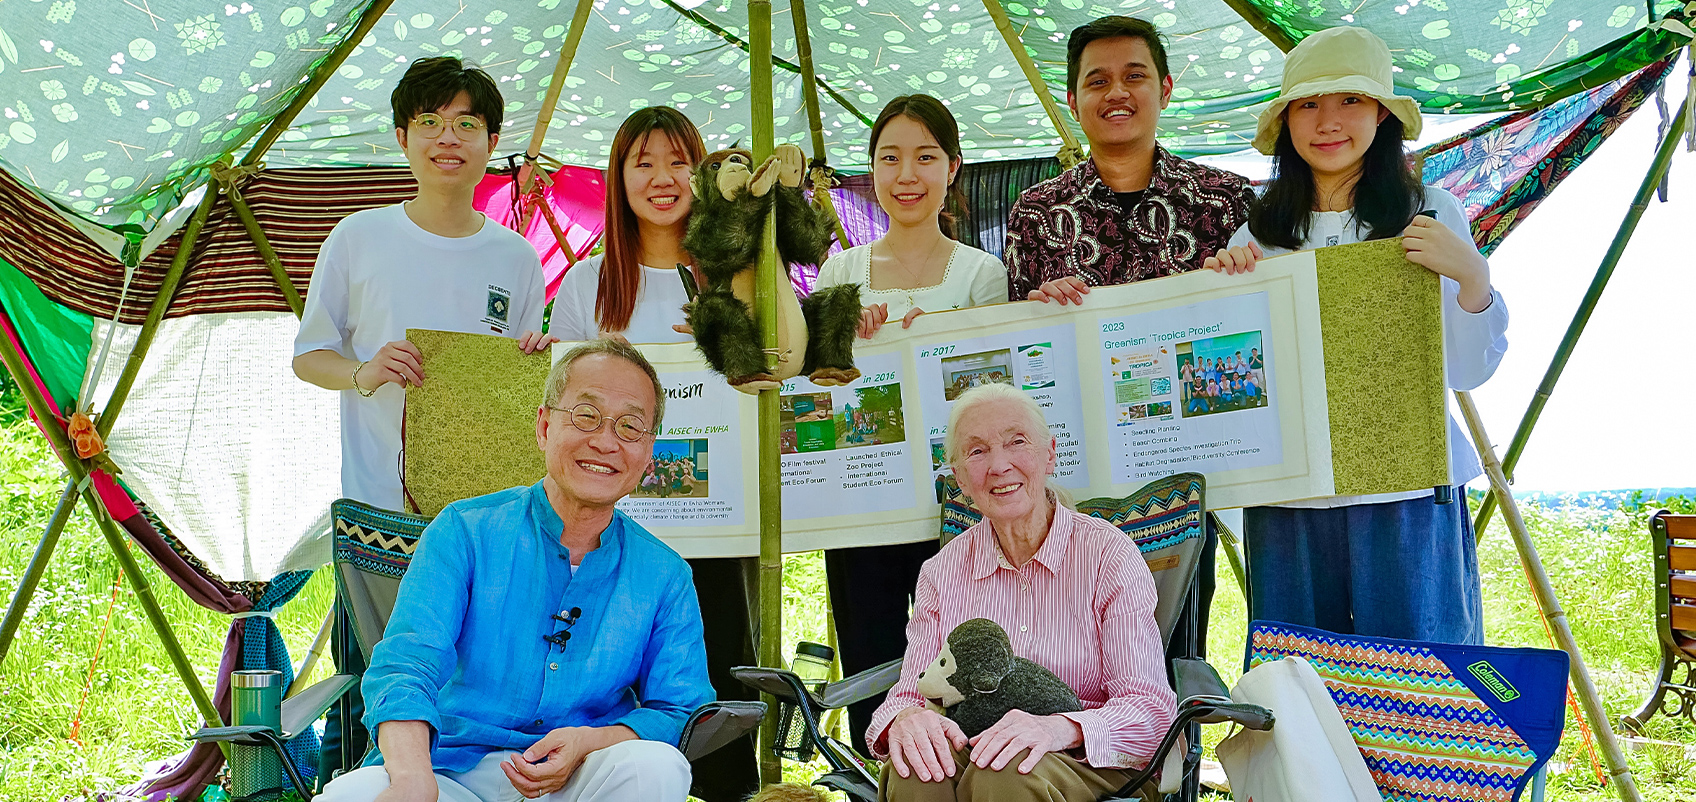 Group photo of people with Jane Goodall